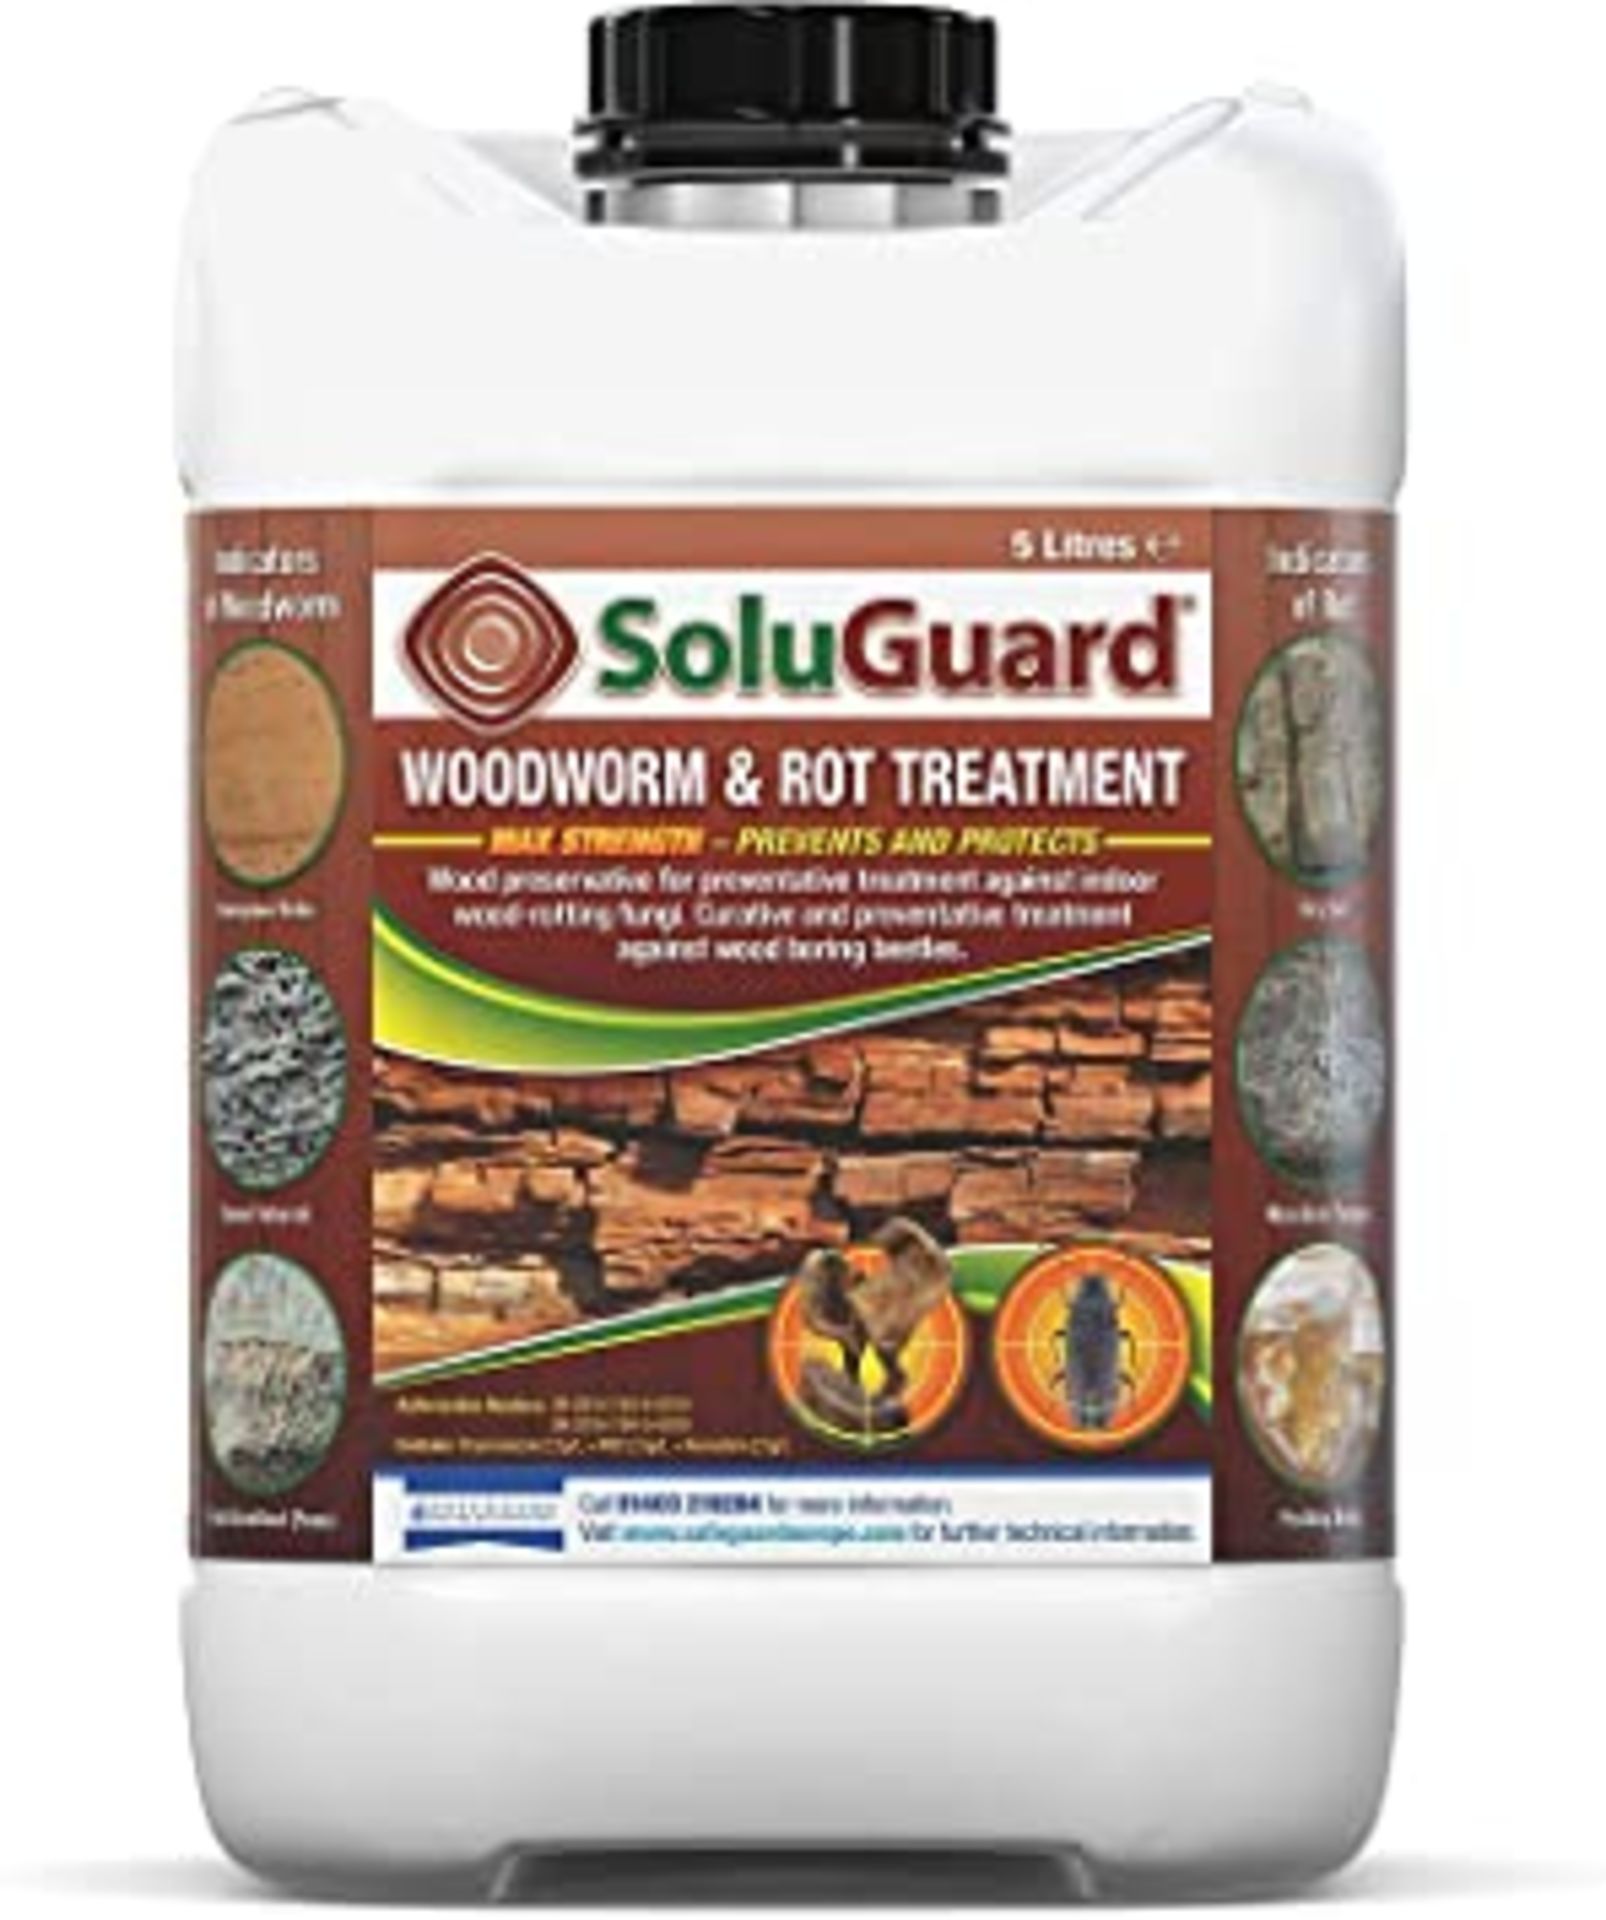 RRP - £30.39 SAFEGUARD Woodworm & Rot Treatment 5 Litre Clear Soluguard Ready to Use (Clear)